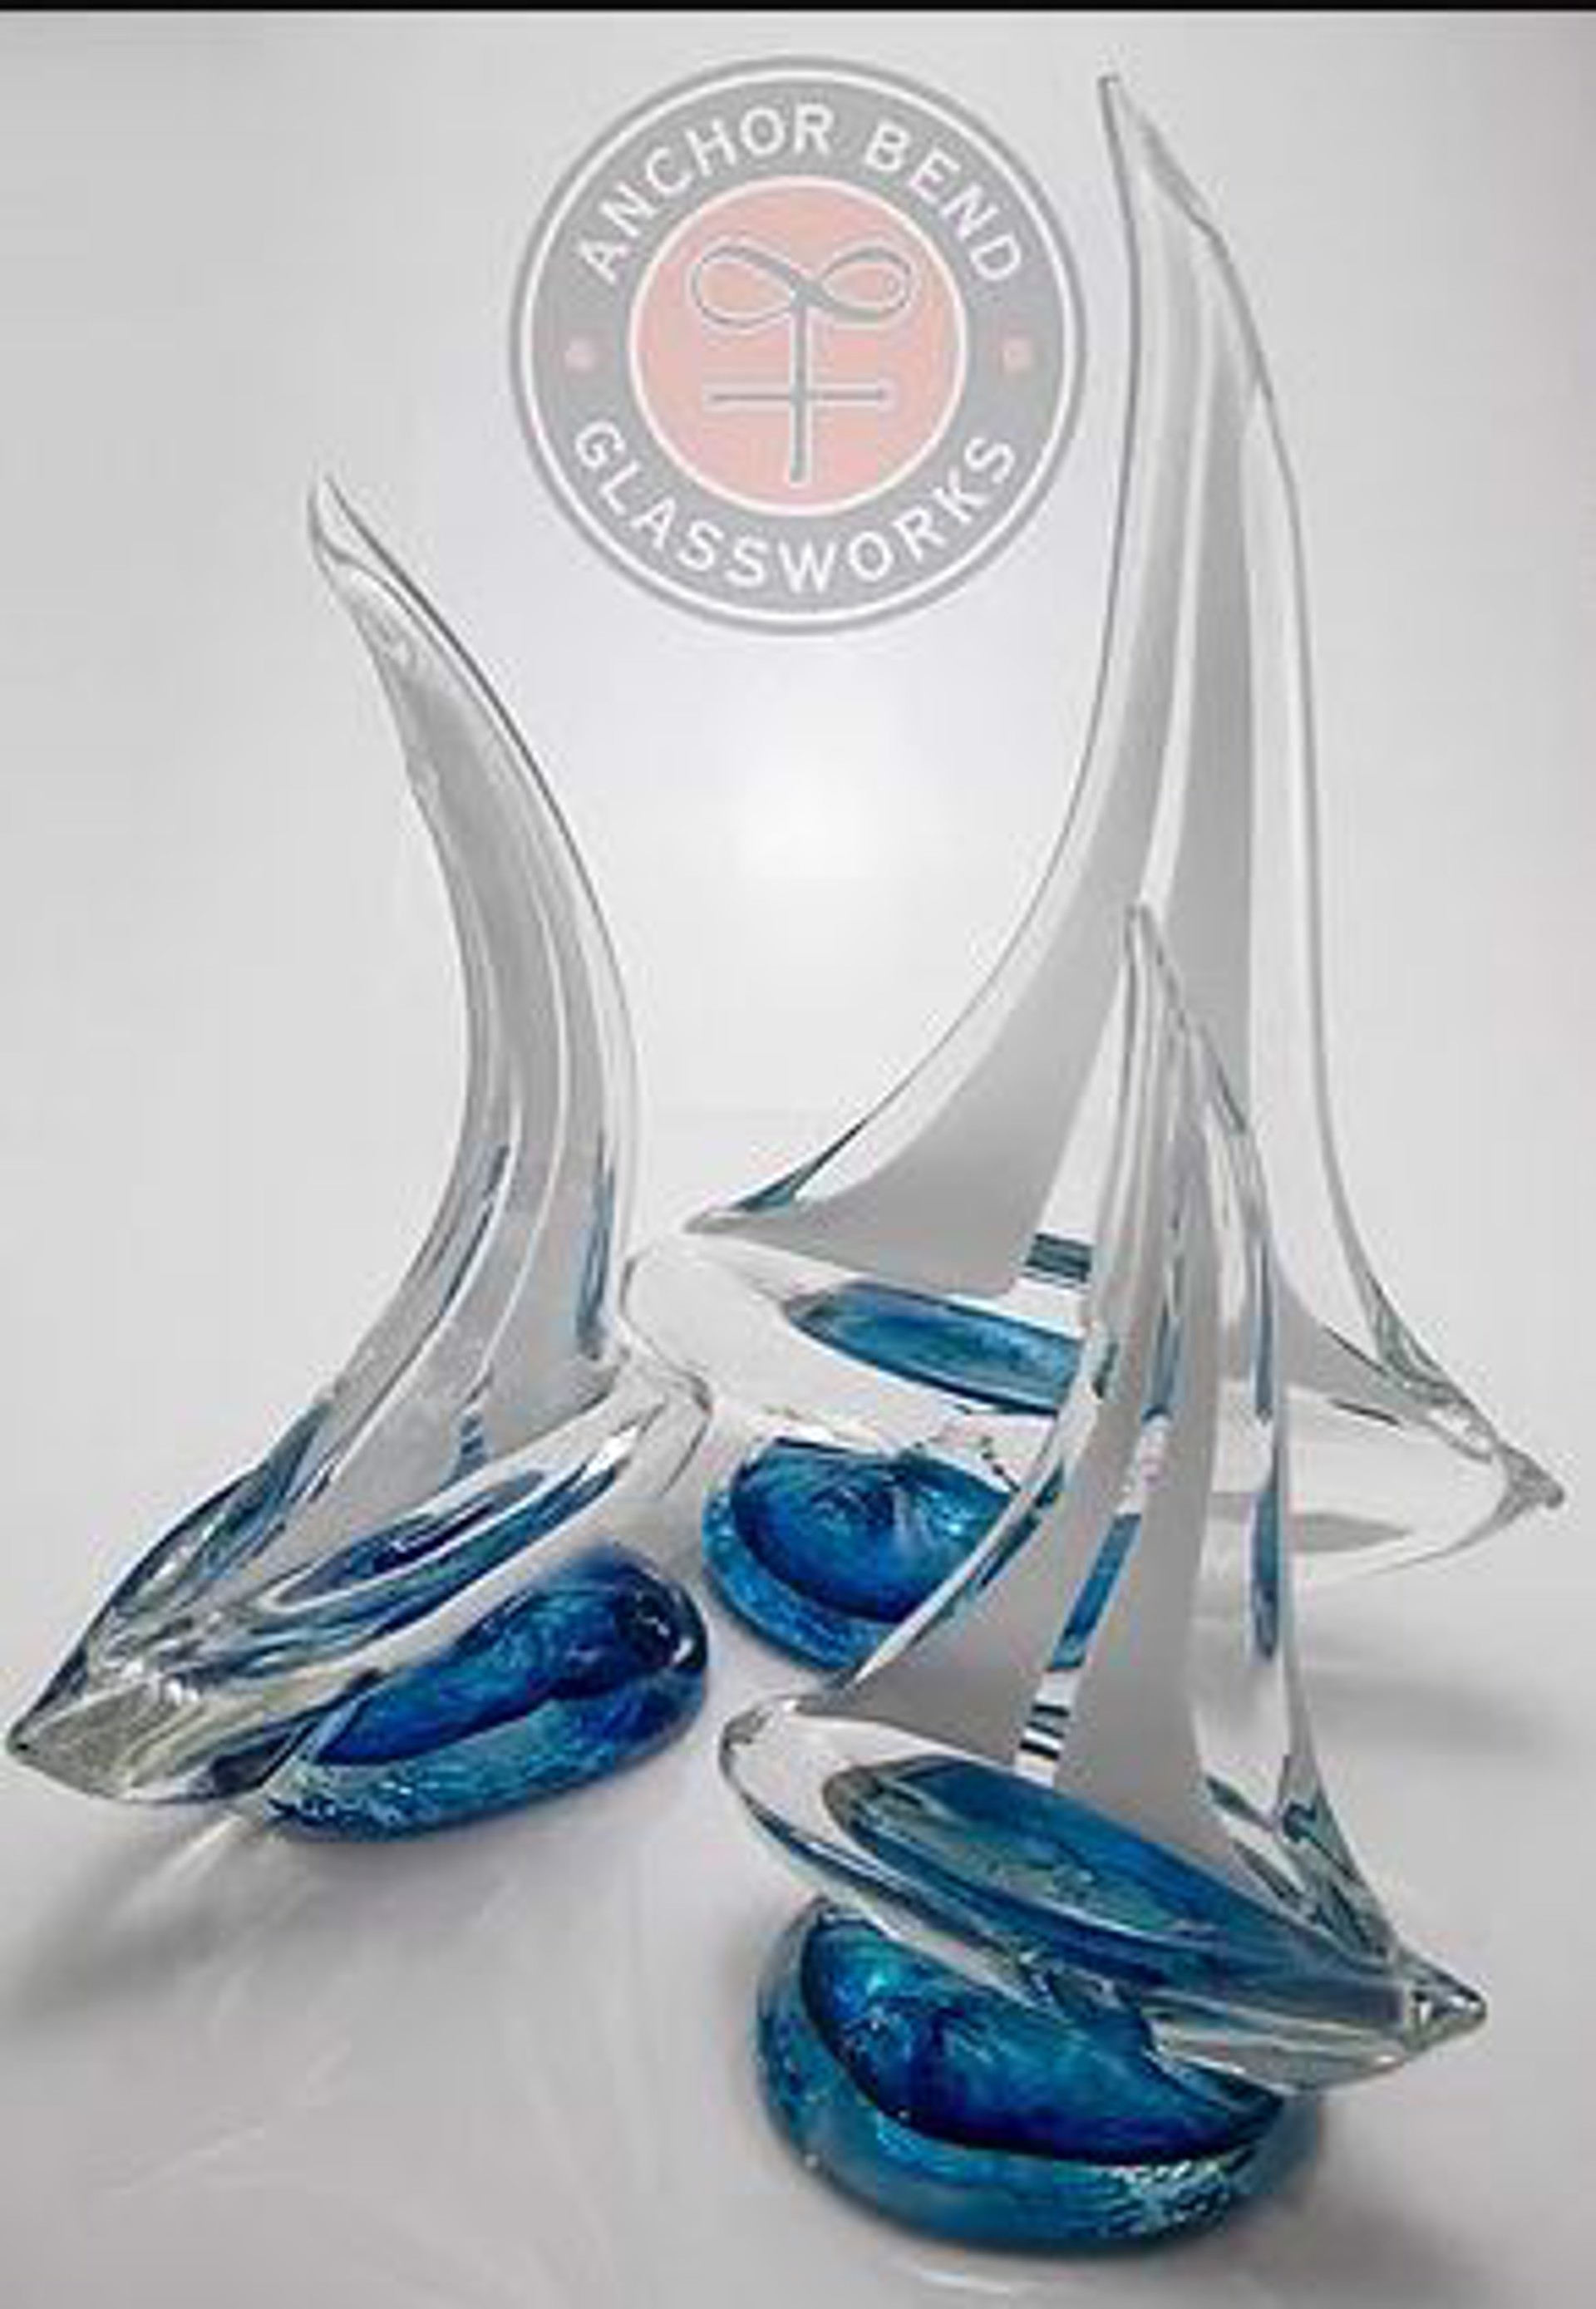 Extra Small Blown Glass Sail Boat by Anchor Bend Glassworks